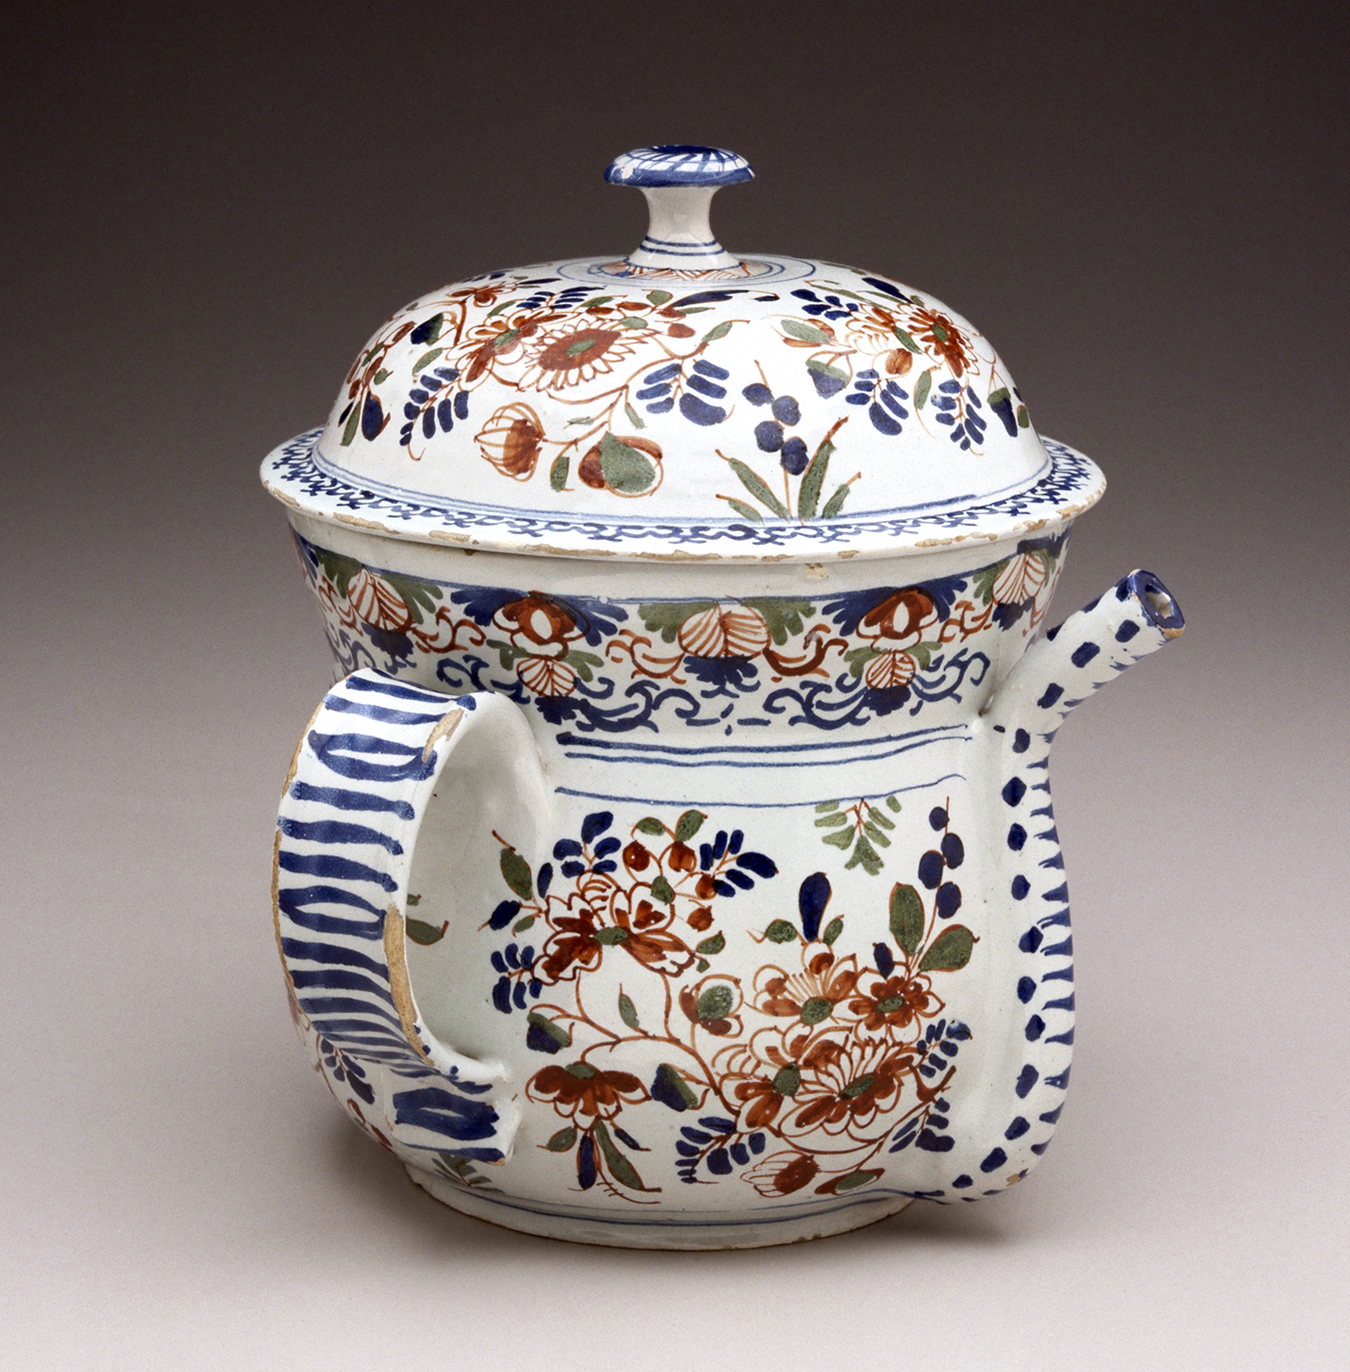 A small white lidded pot with a spout and handle. The white surface is painted with red, green, and blue decorations.